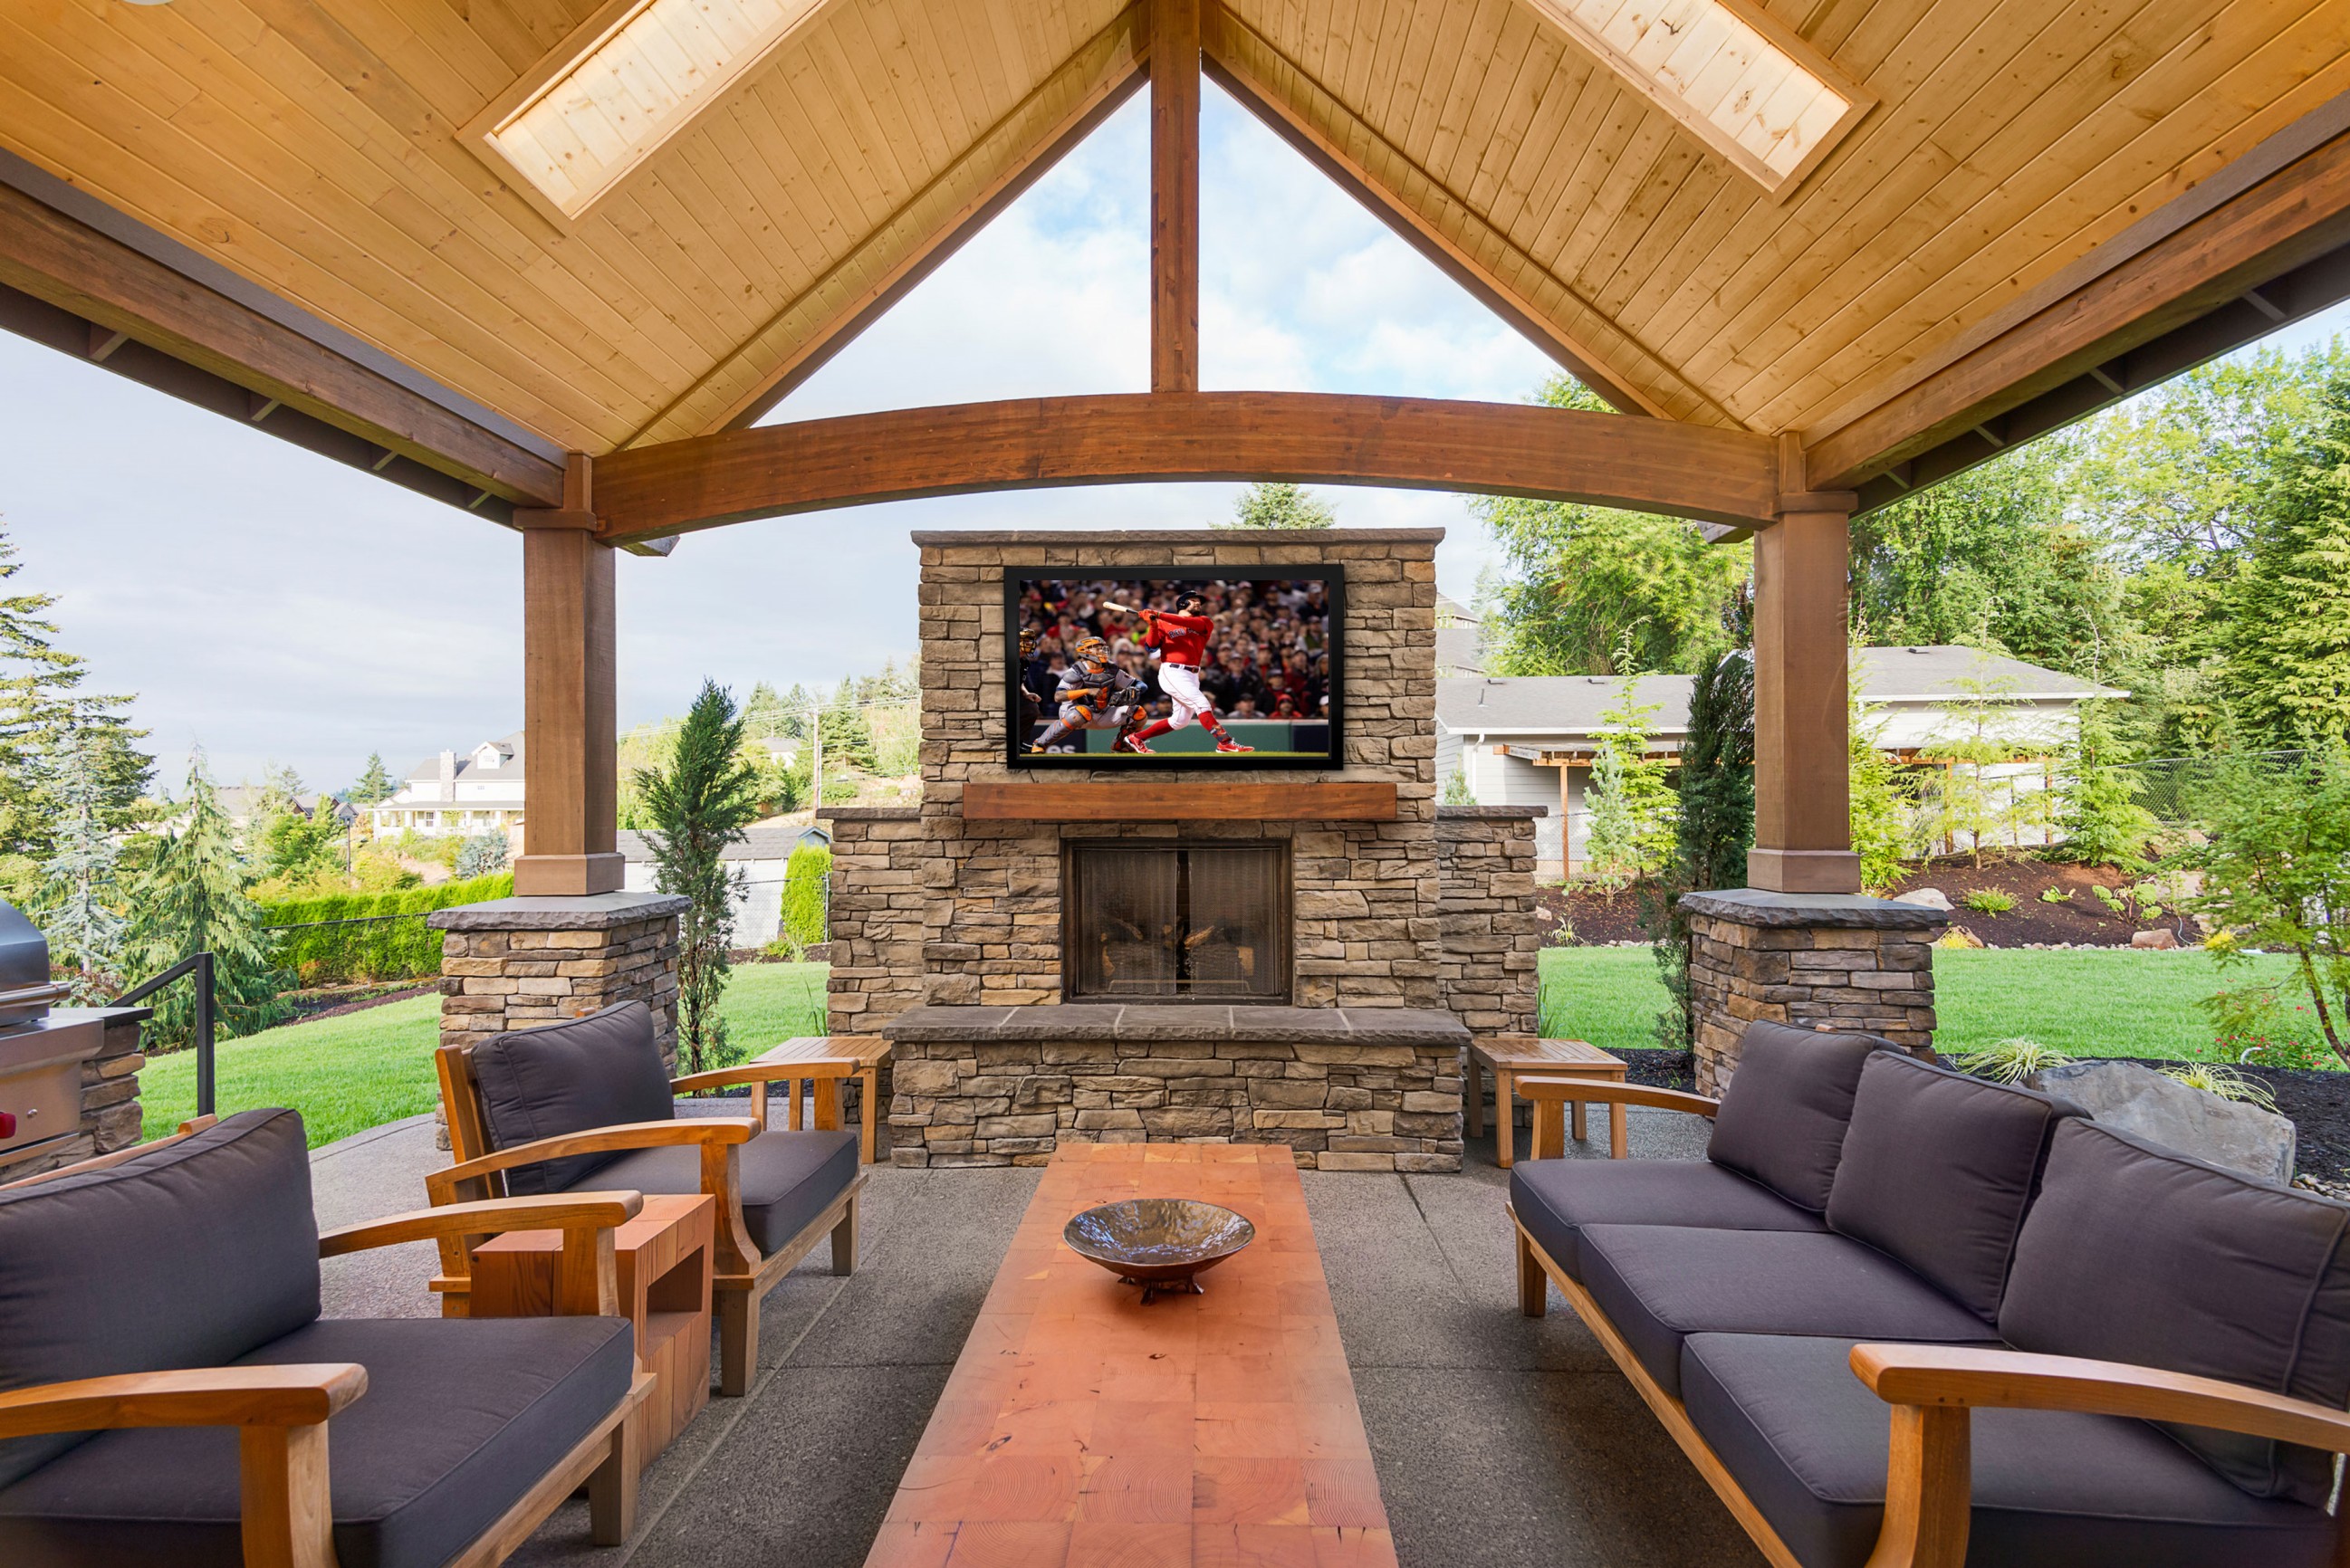 Make More Of Your Summer Entertaining With Outdoor TVs 